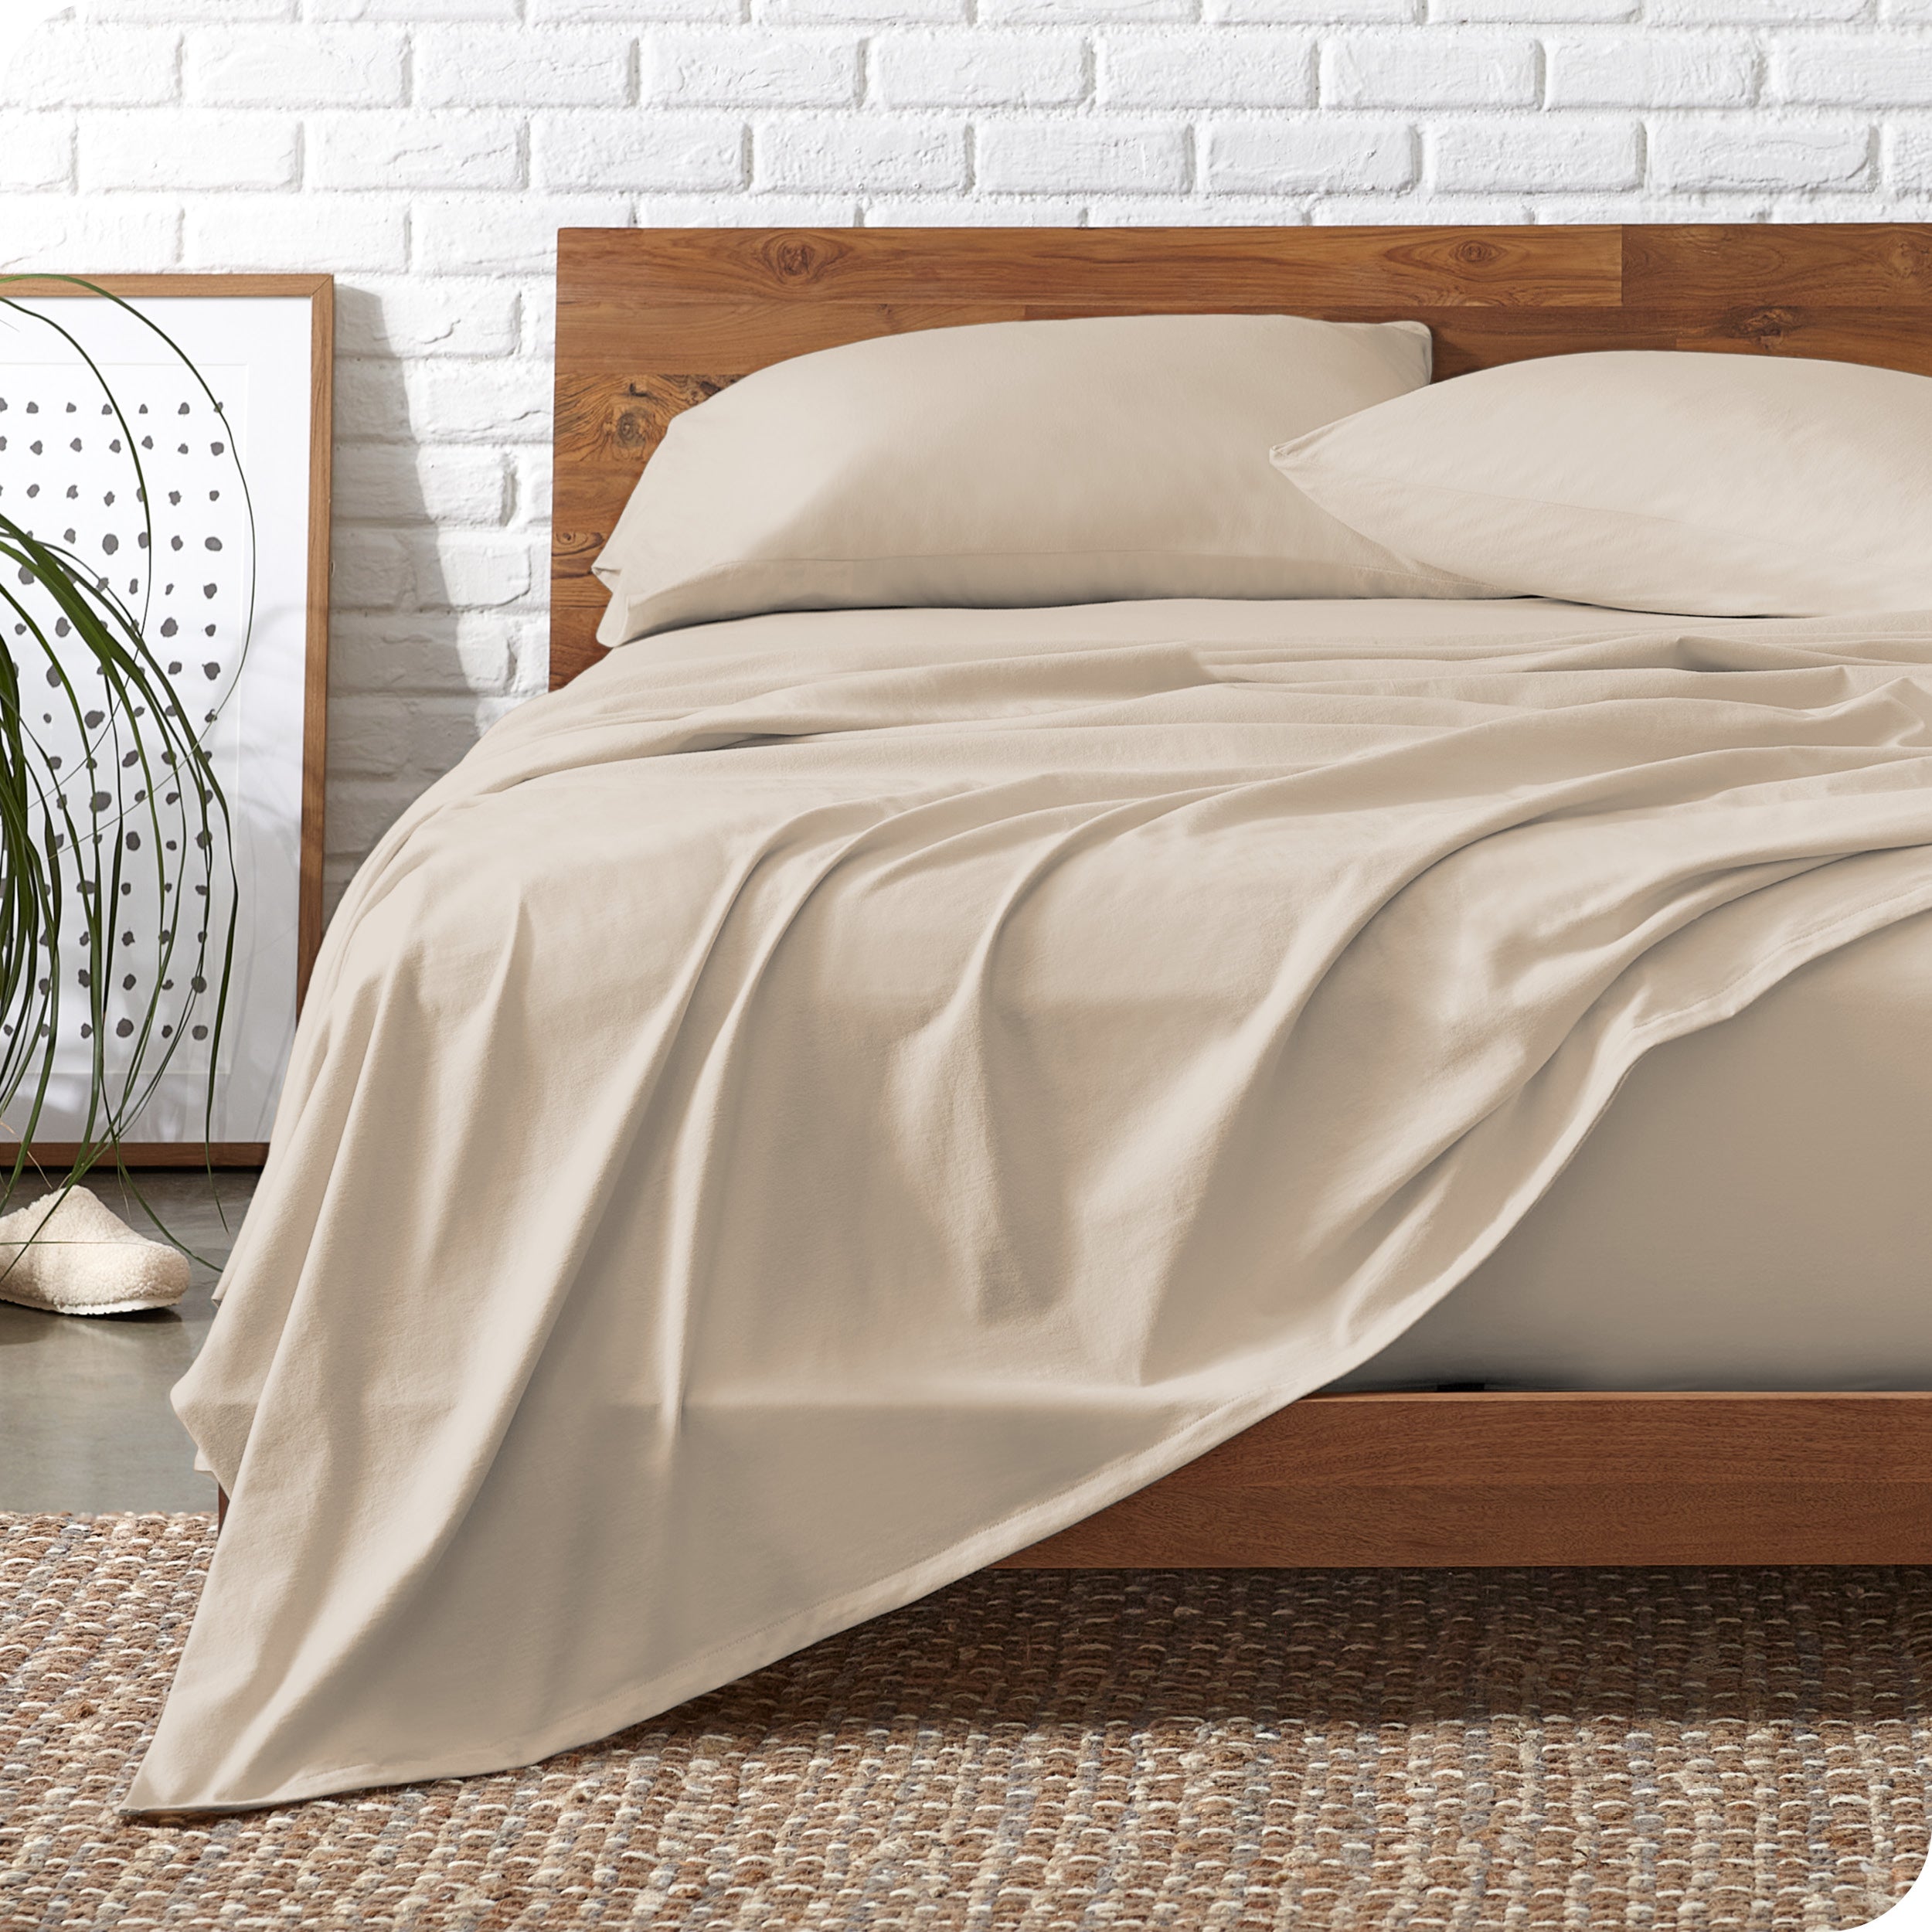 Wooden bed frame with sand organic cotton jersey sheets on the bed